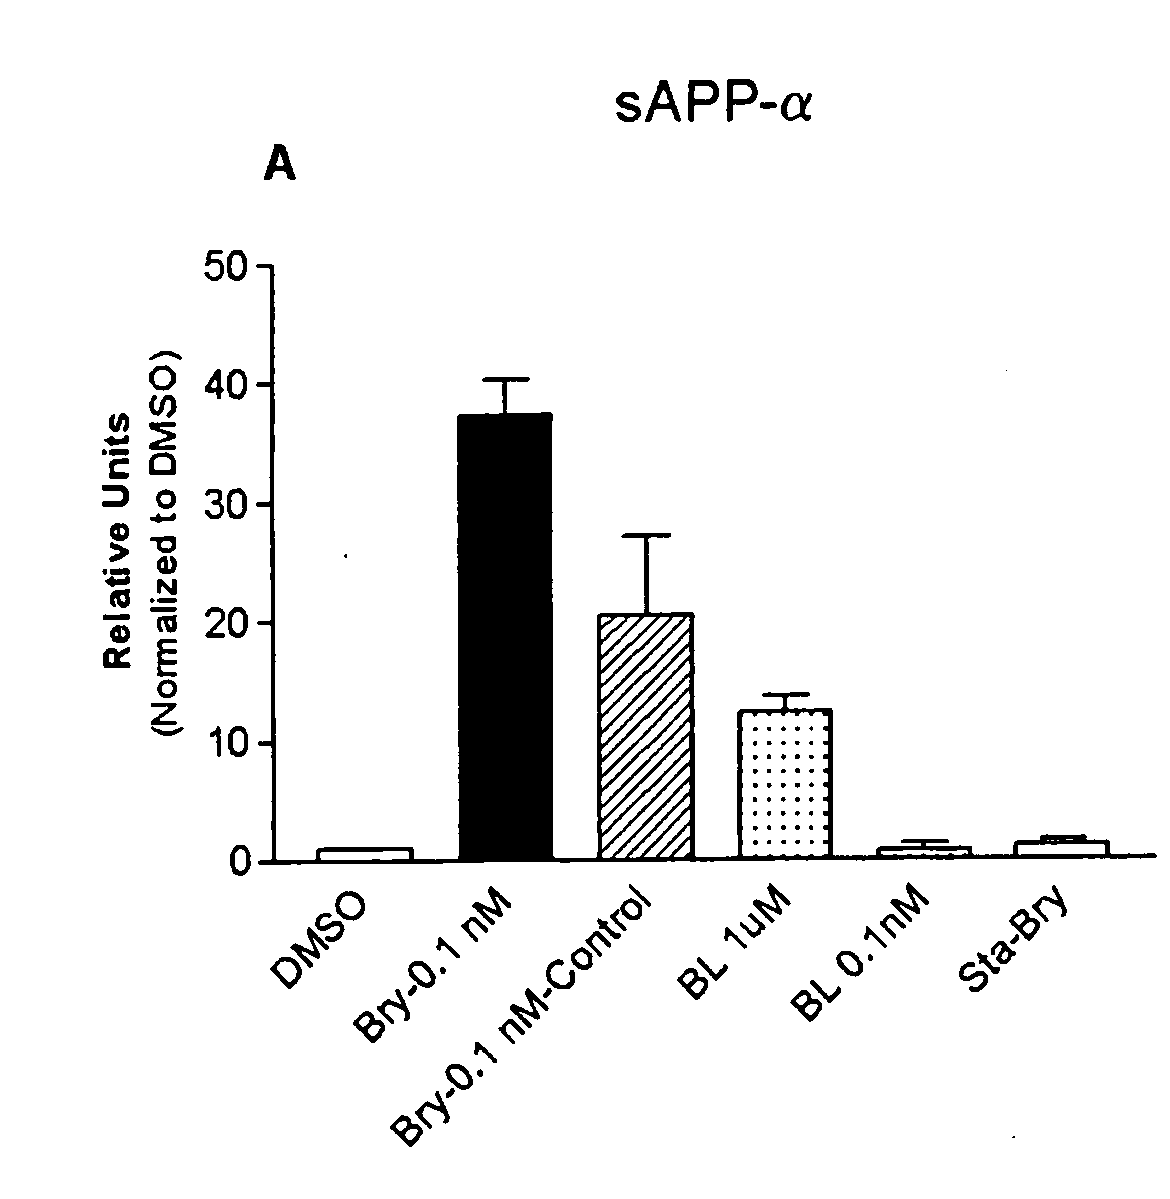 PKC activation as a means for enhancing sAPPALPHA secretion and improving cognition using bryostatin type compounds